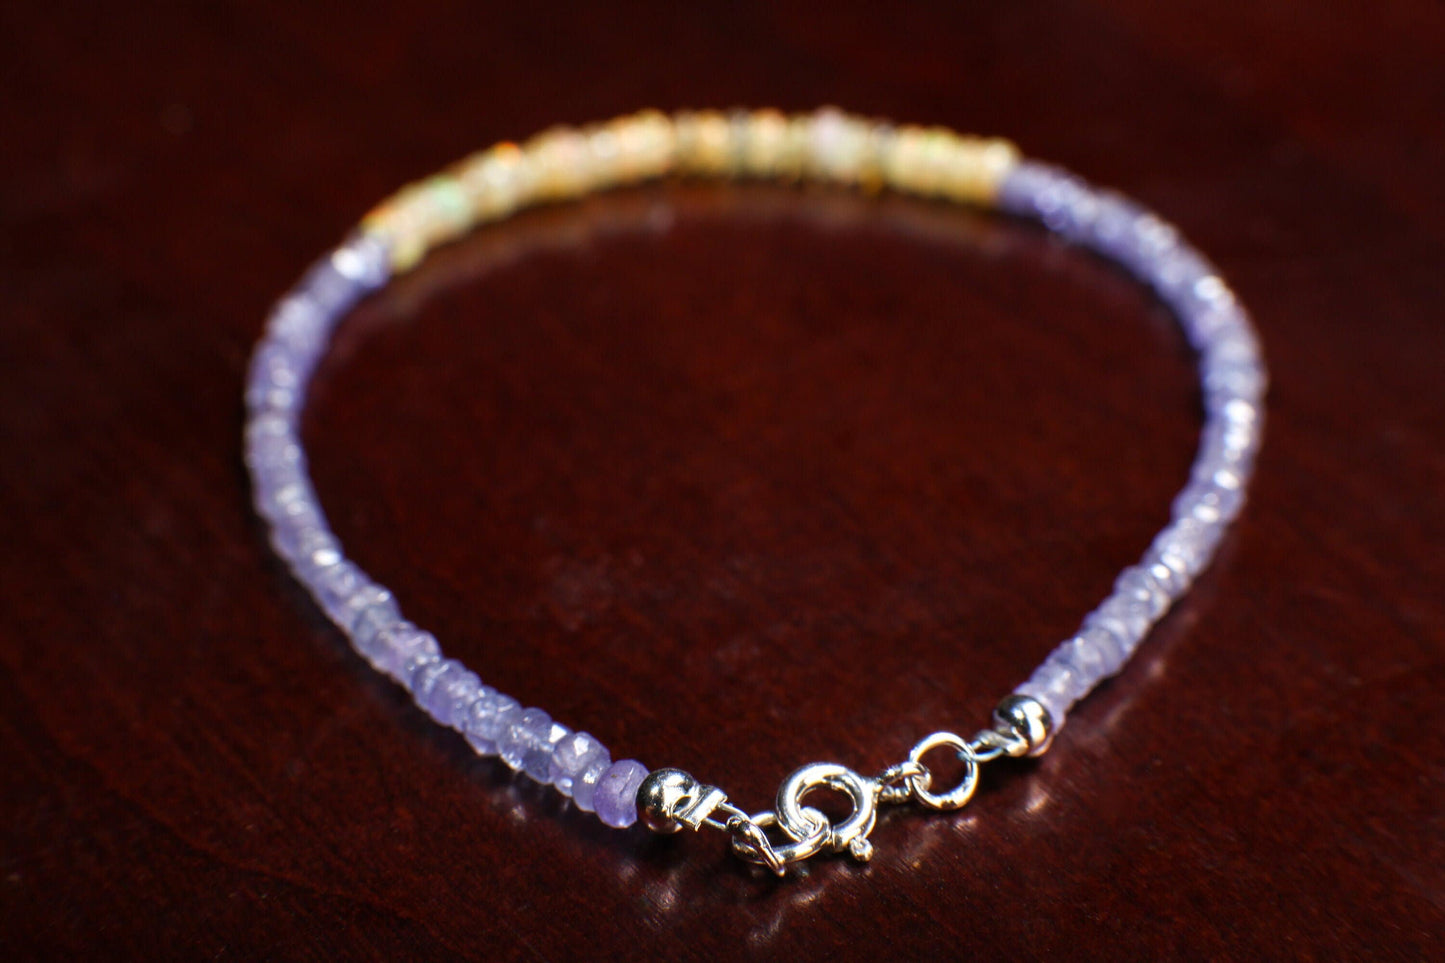 Tanzanite Faceted 3mm Rondelle with Ethiopian Opal Gemstone Bracelet in 925 Sterling Silver Chain and Clasp, Gift for her